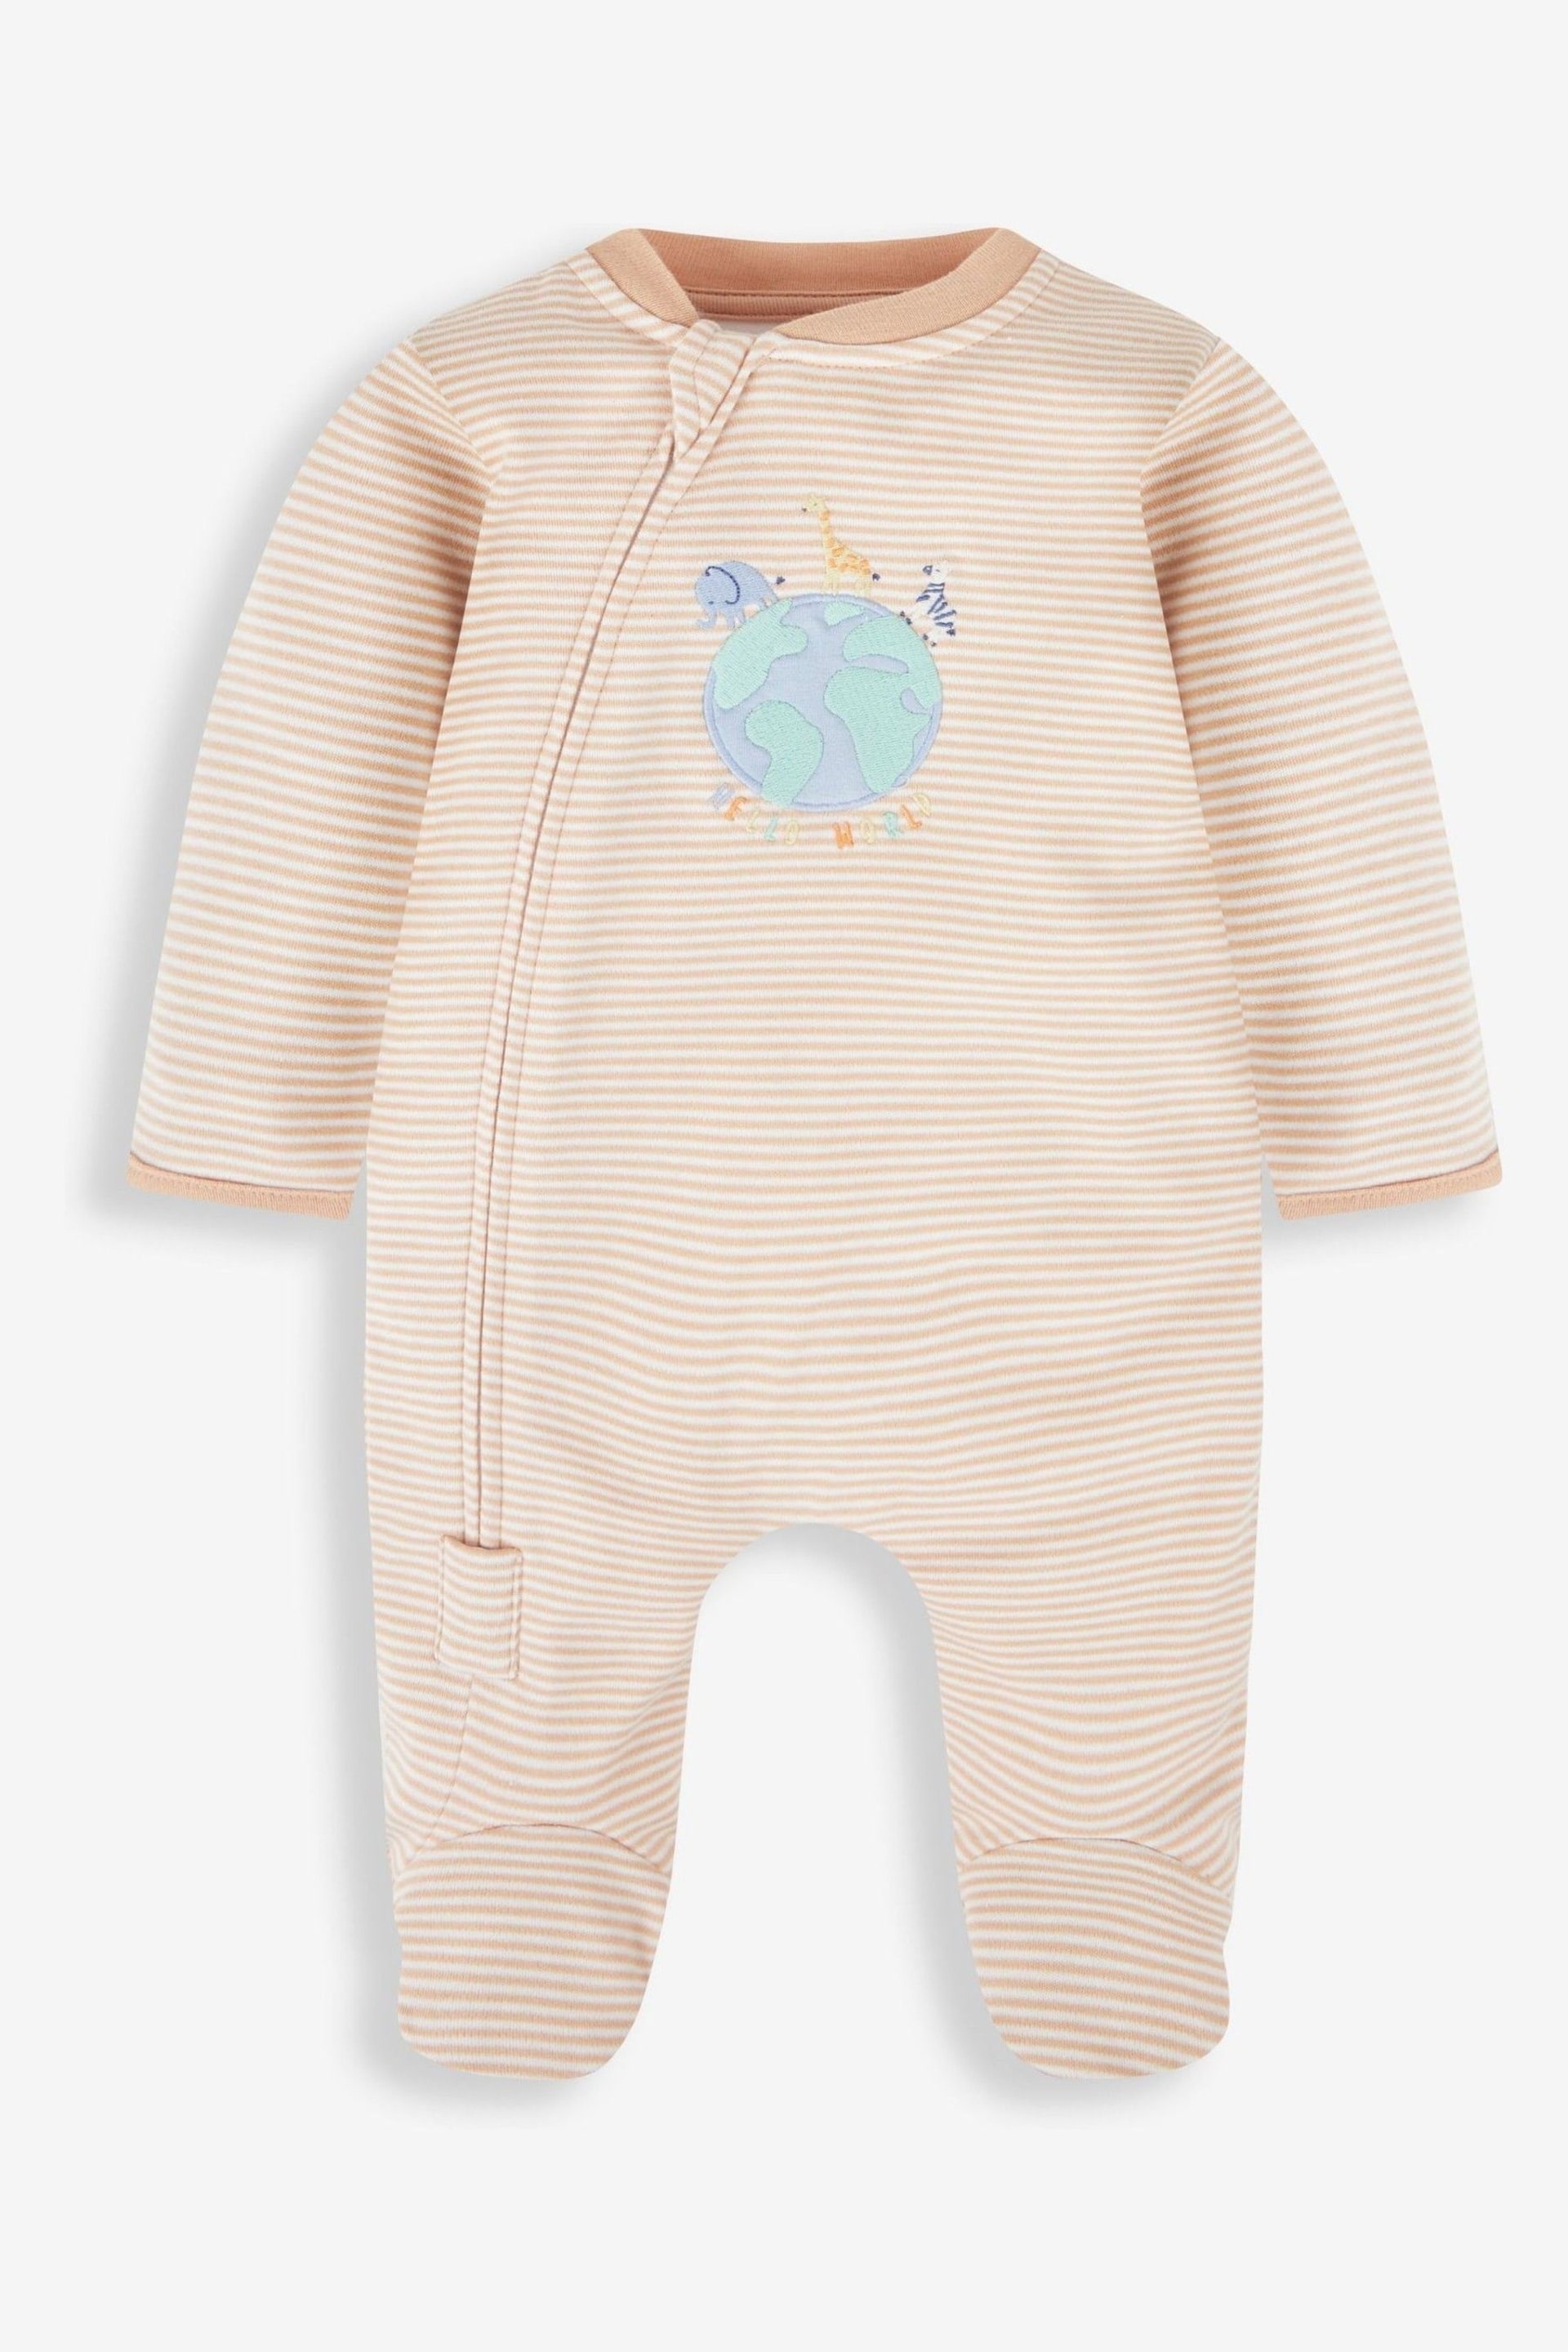 JoJo Maman Bébé Natural Hello World Embroidered Cotton Zip Baby Sleepsuit - Image 1 of 3